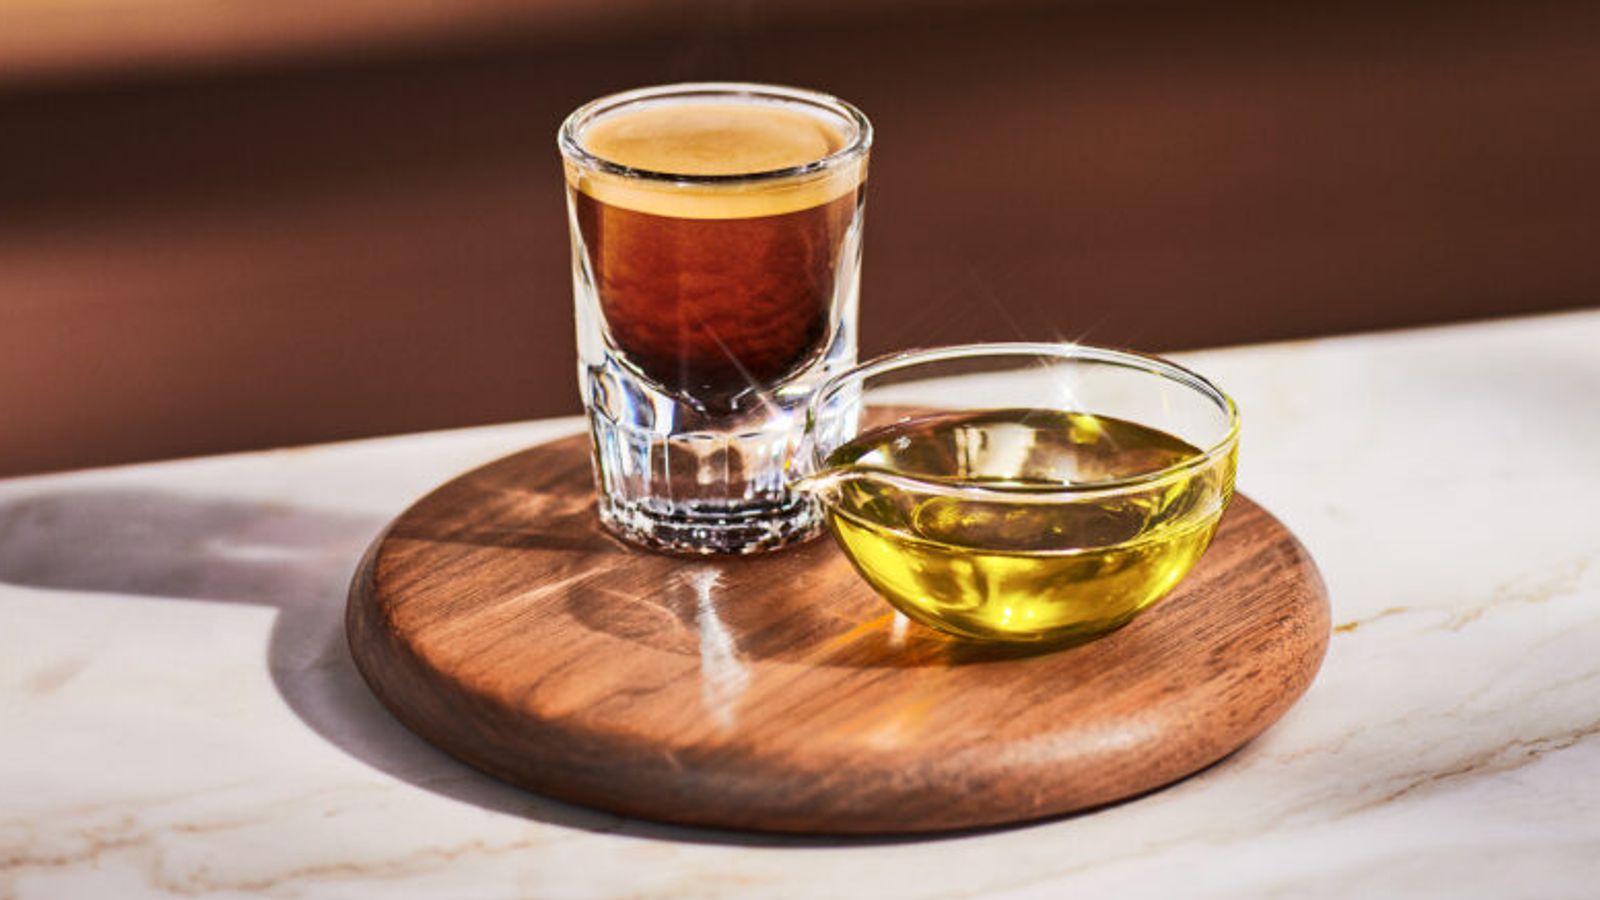 Starbucks launches olive oil coffee in Italy - and it's coming to the UK next